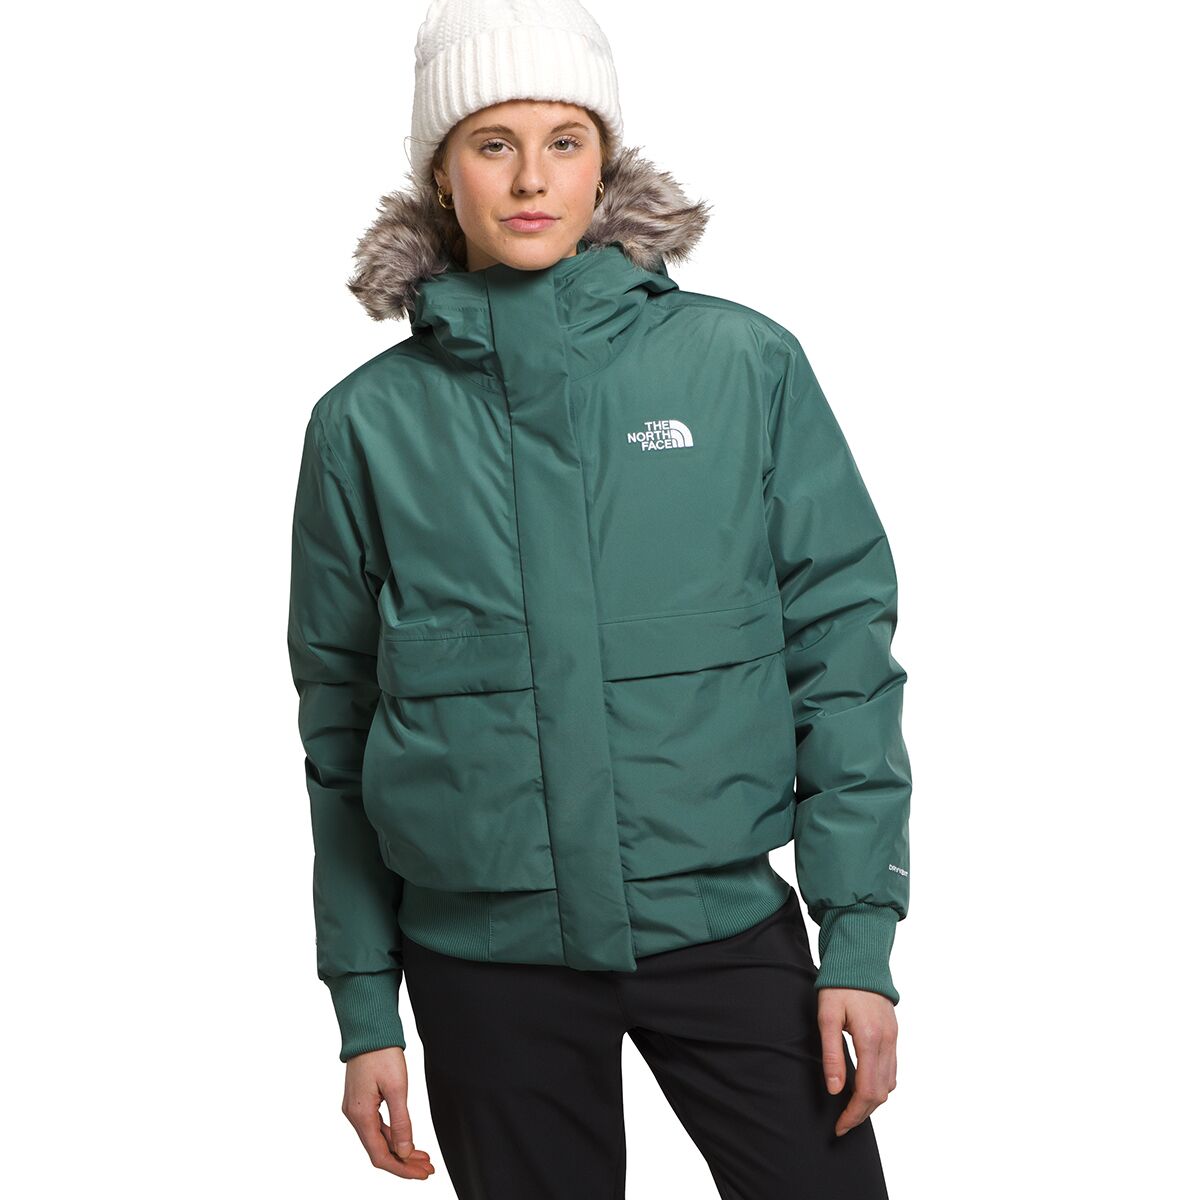 The North Face Arctic Bomber Jacket - Women's